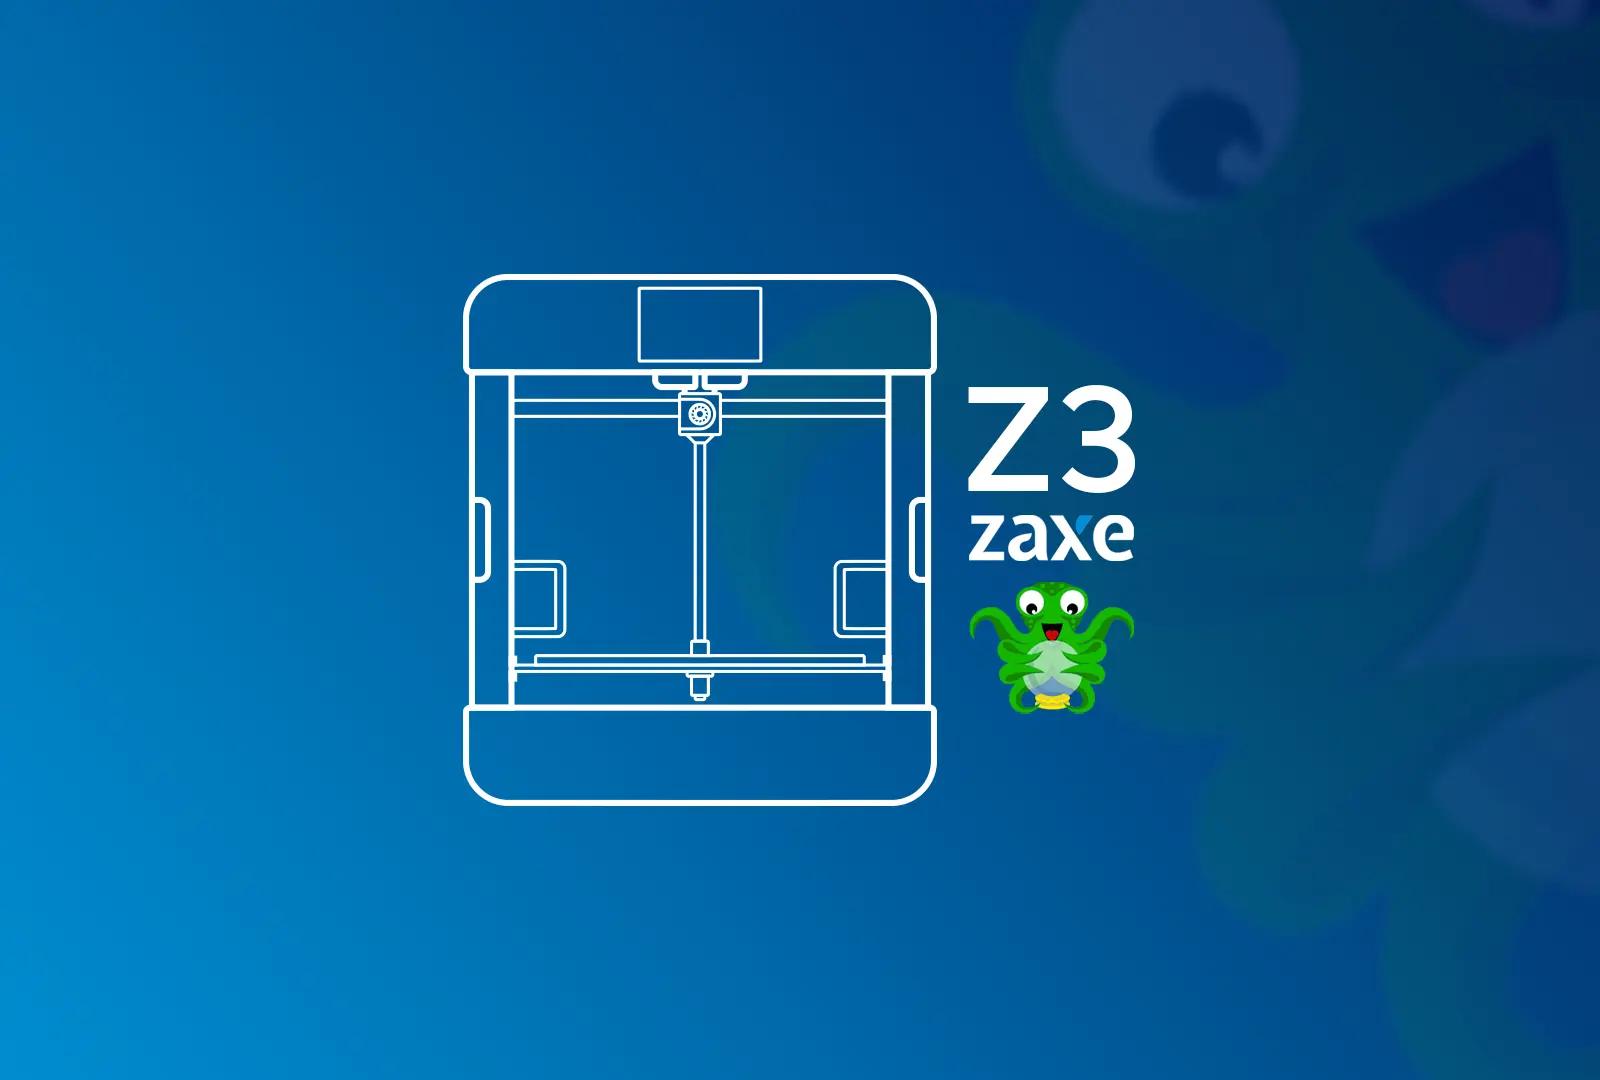 How to Use OctoPi on Your Zaxe Z3 Printer